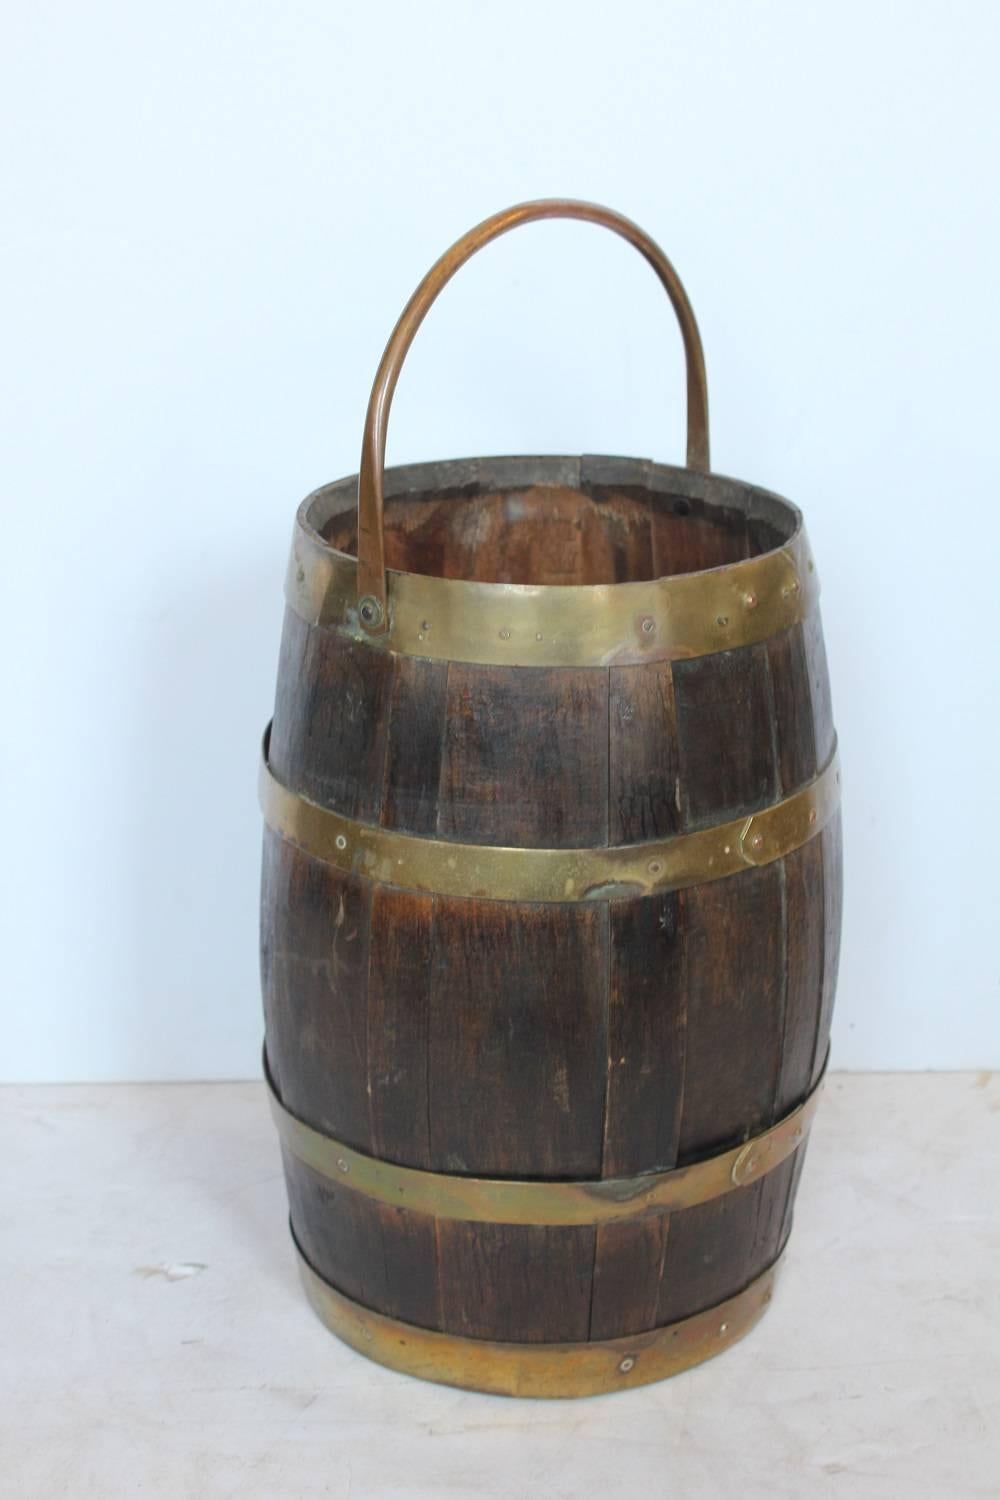 Antique brass and wood umbrella stand or waste basket.